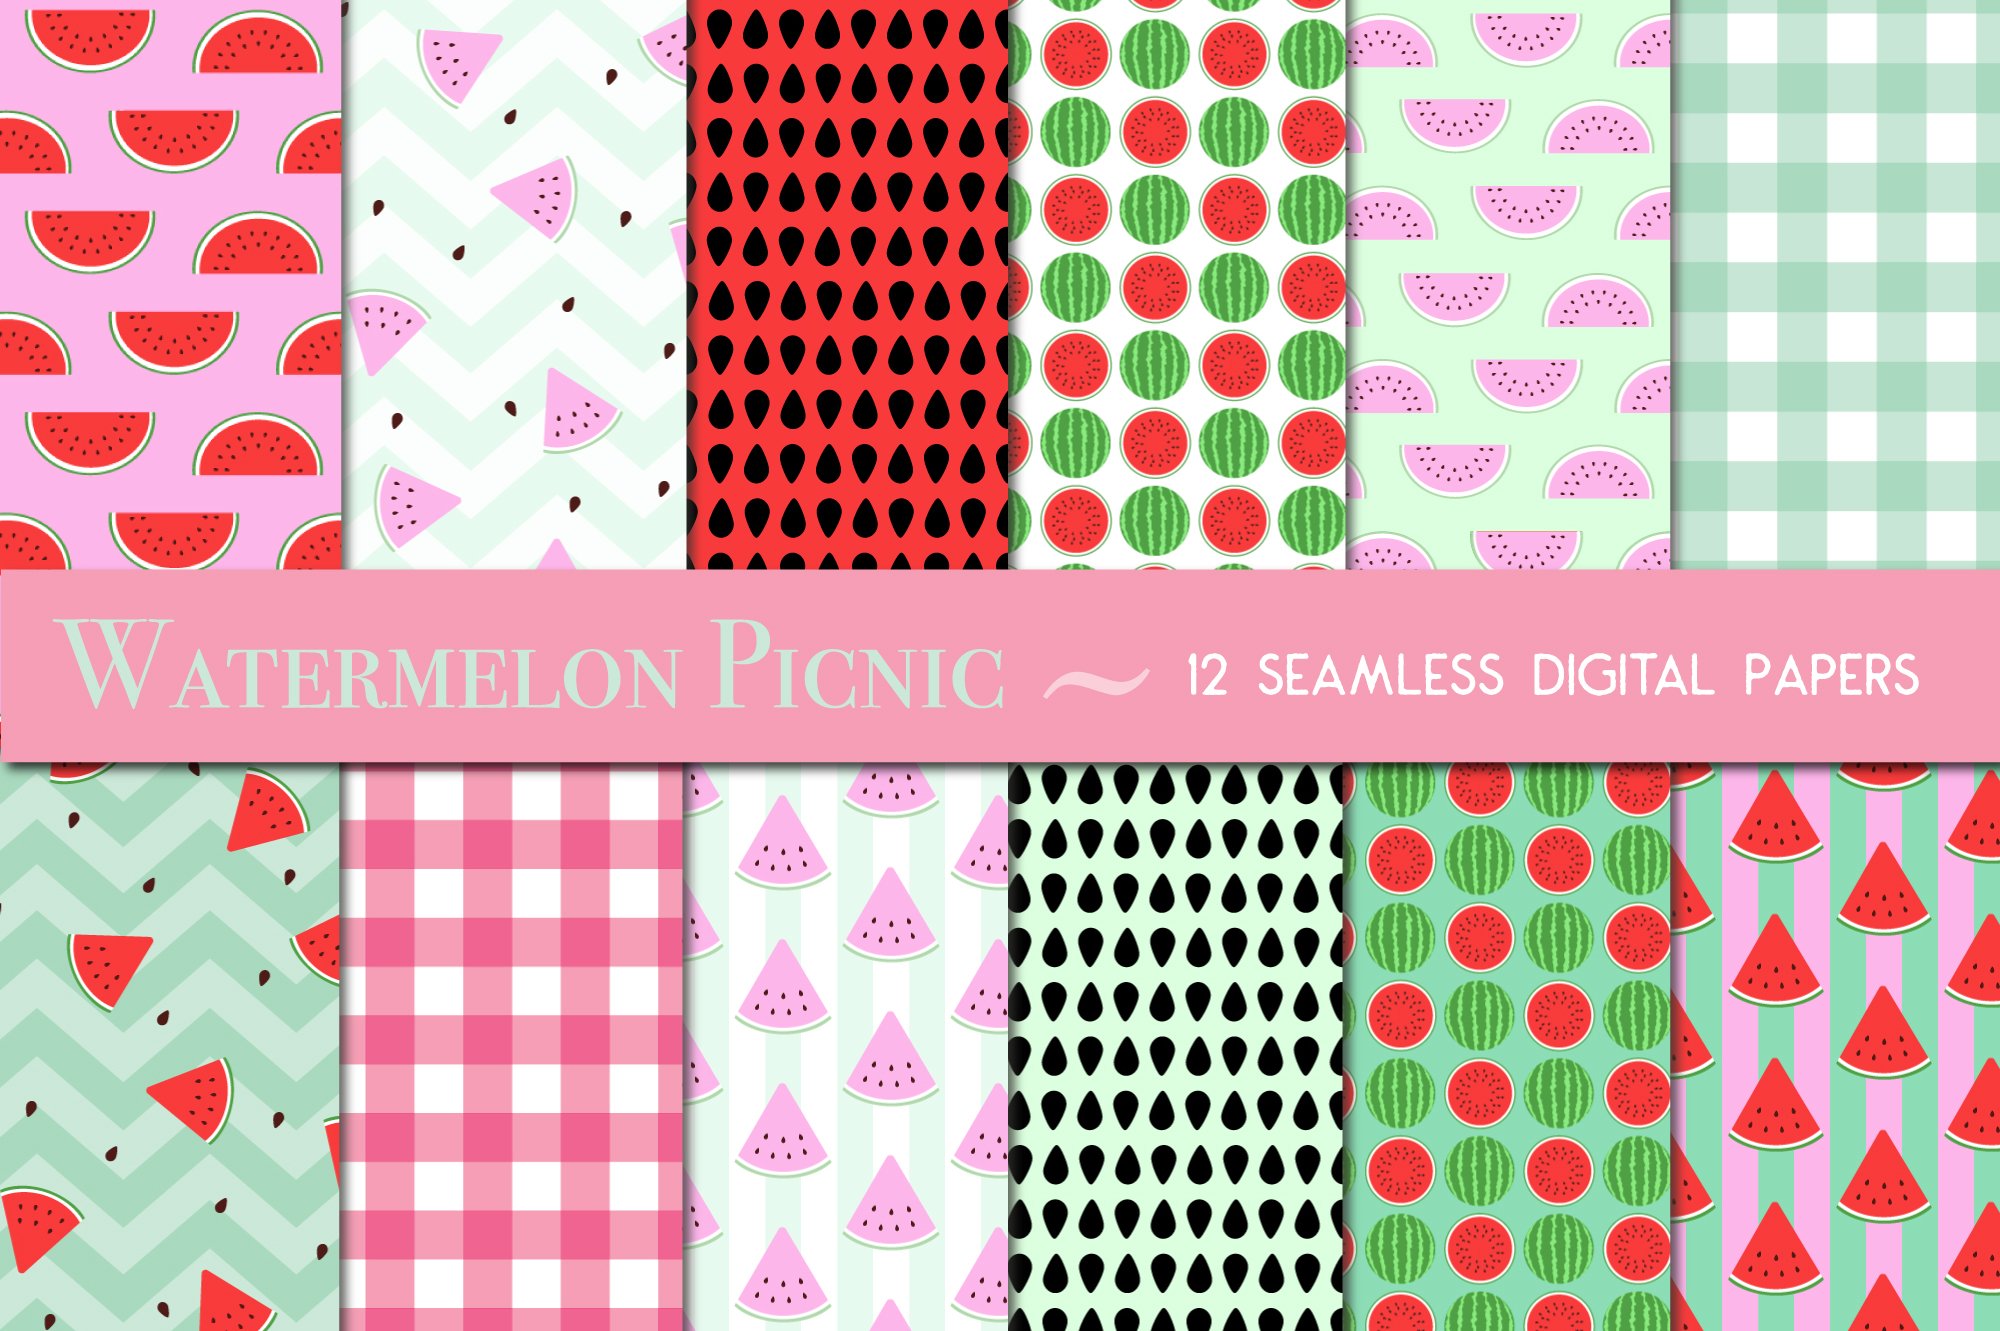 Watermelon Picnic Patterns cover image.